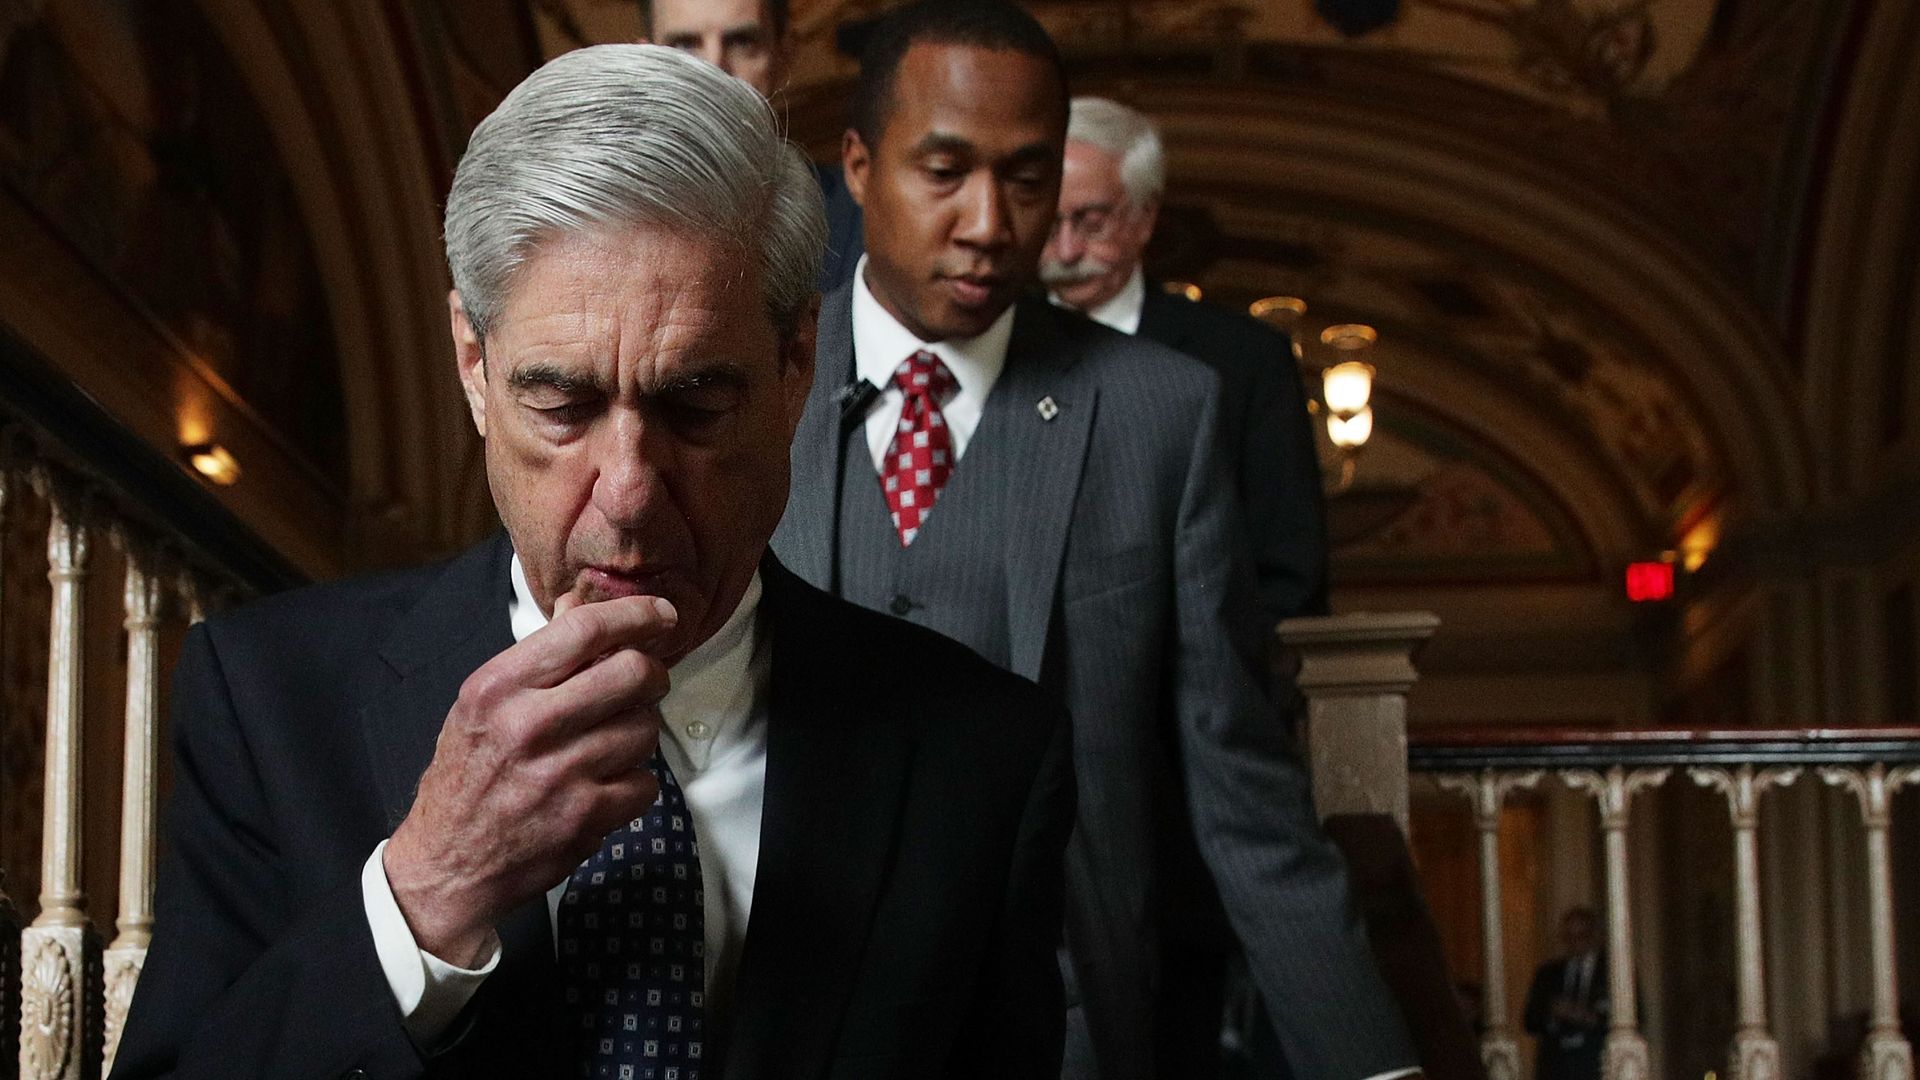 Robert Mueller walking downstairs with his hand to his chin